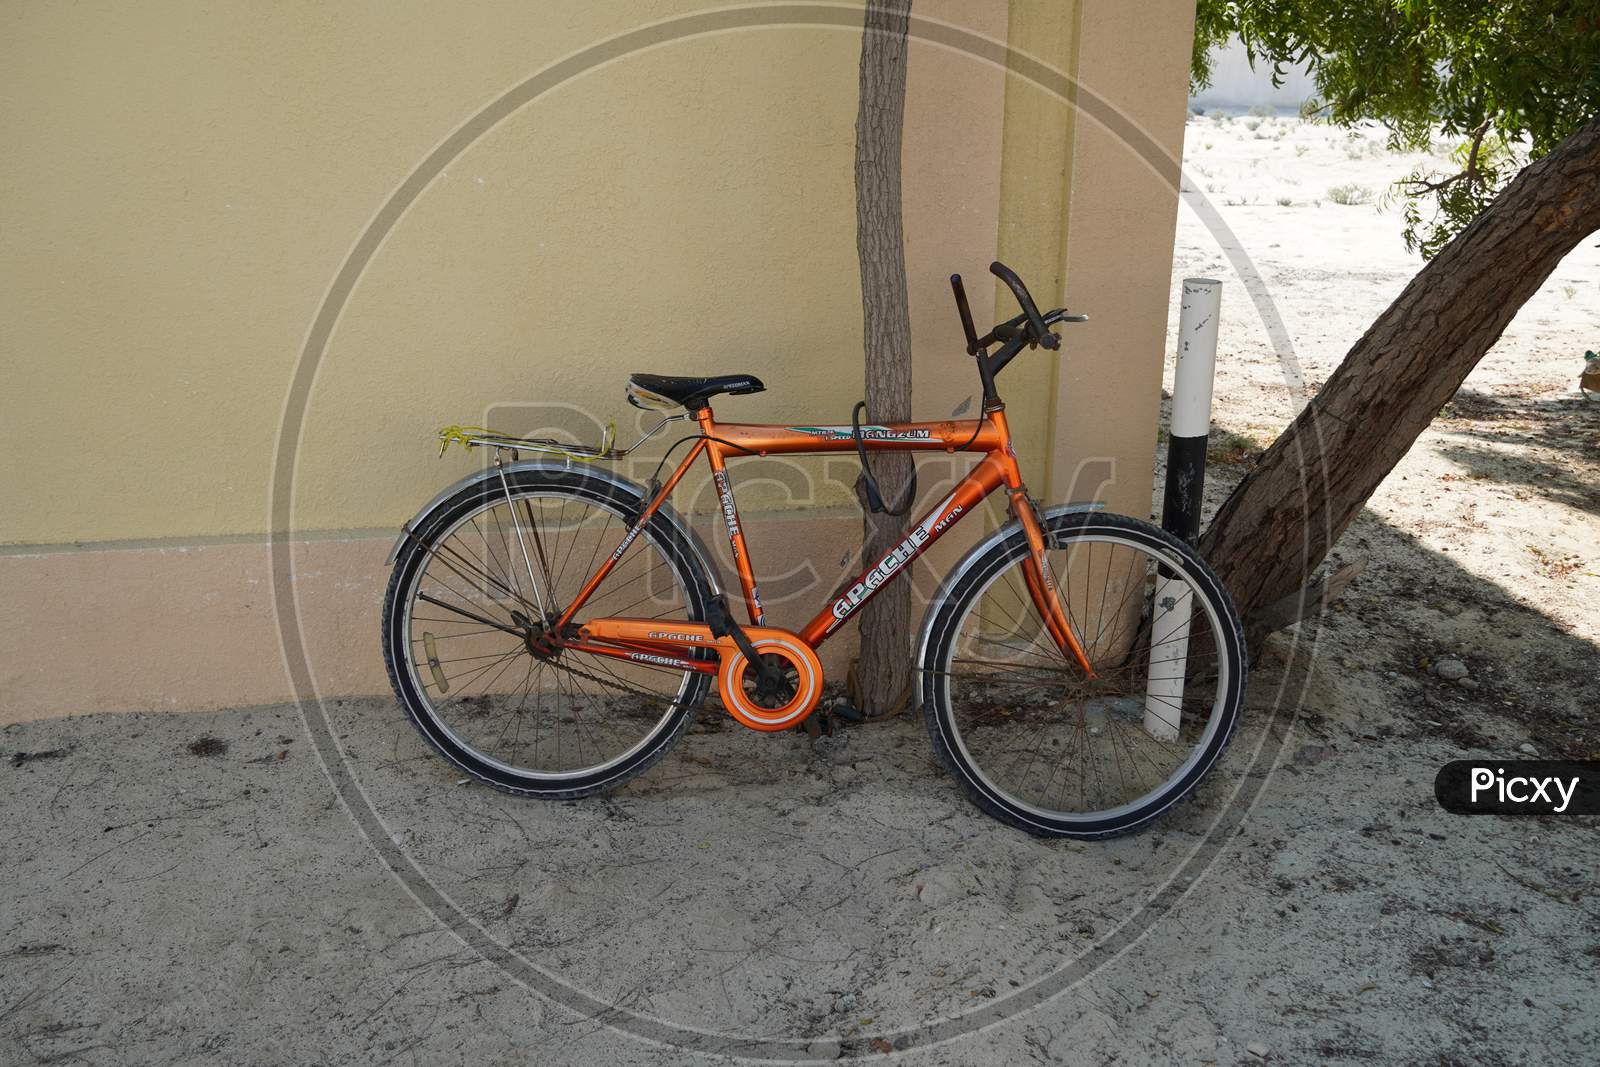 An Old Orange Bicycle Is Standing On The Sand Path Locked To A Tree. Old Apache Orange Cycle Chained To A Tree. Man'S Cycle With Lock In Tree In A Sandy Place. - Dubai Uae December 2019